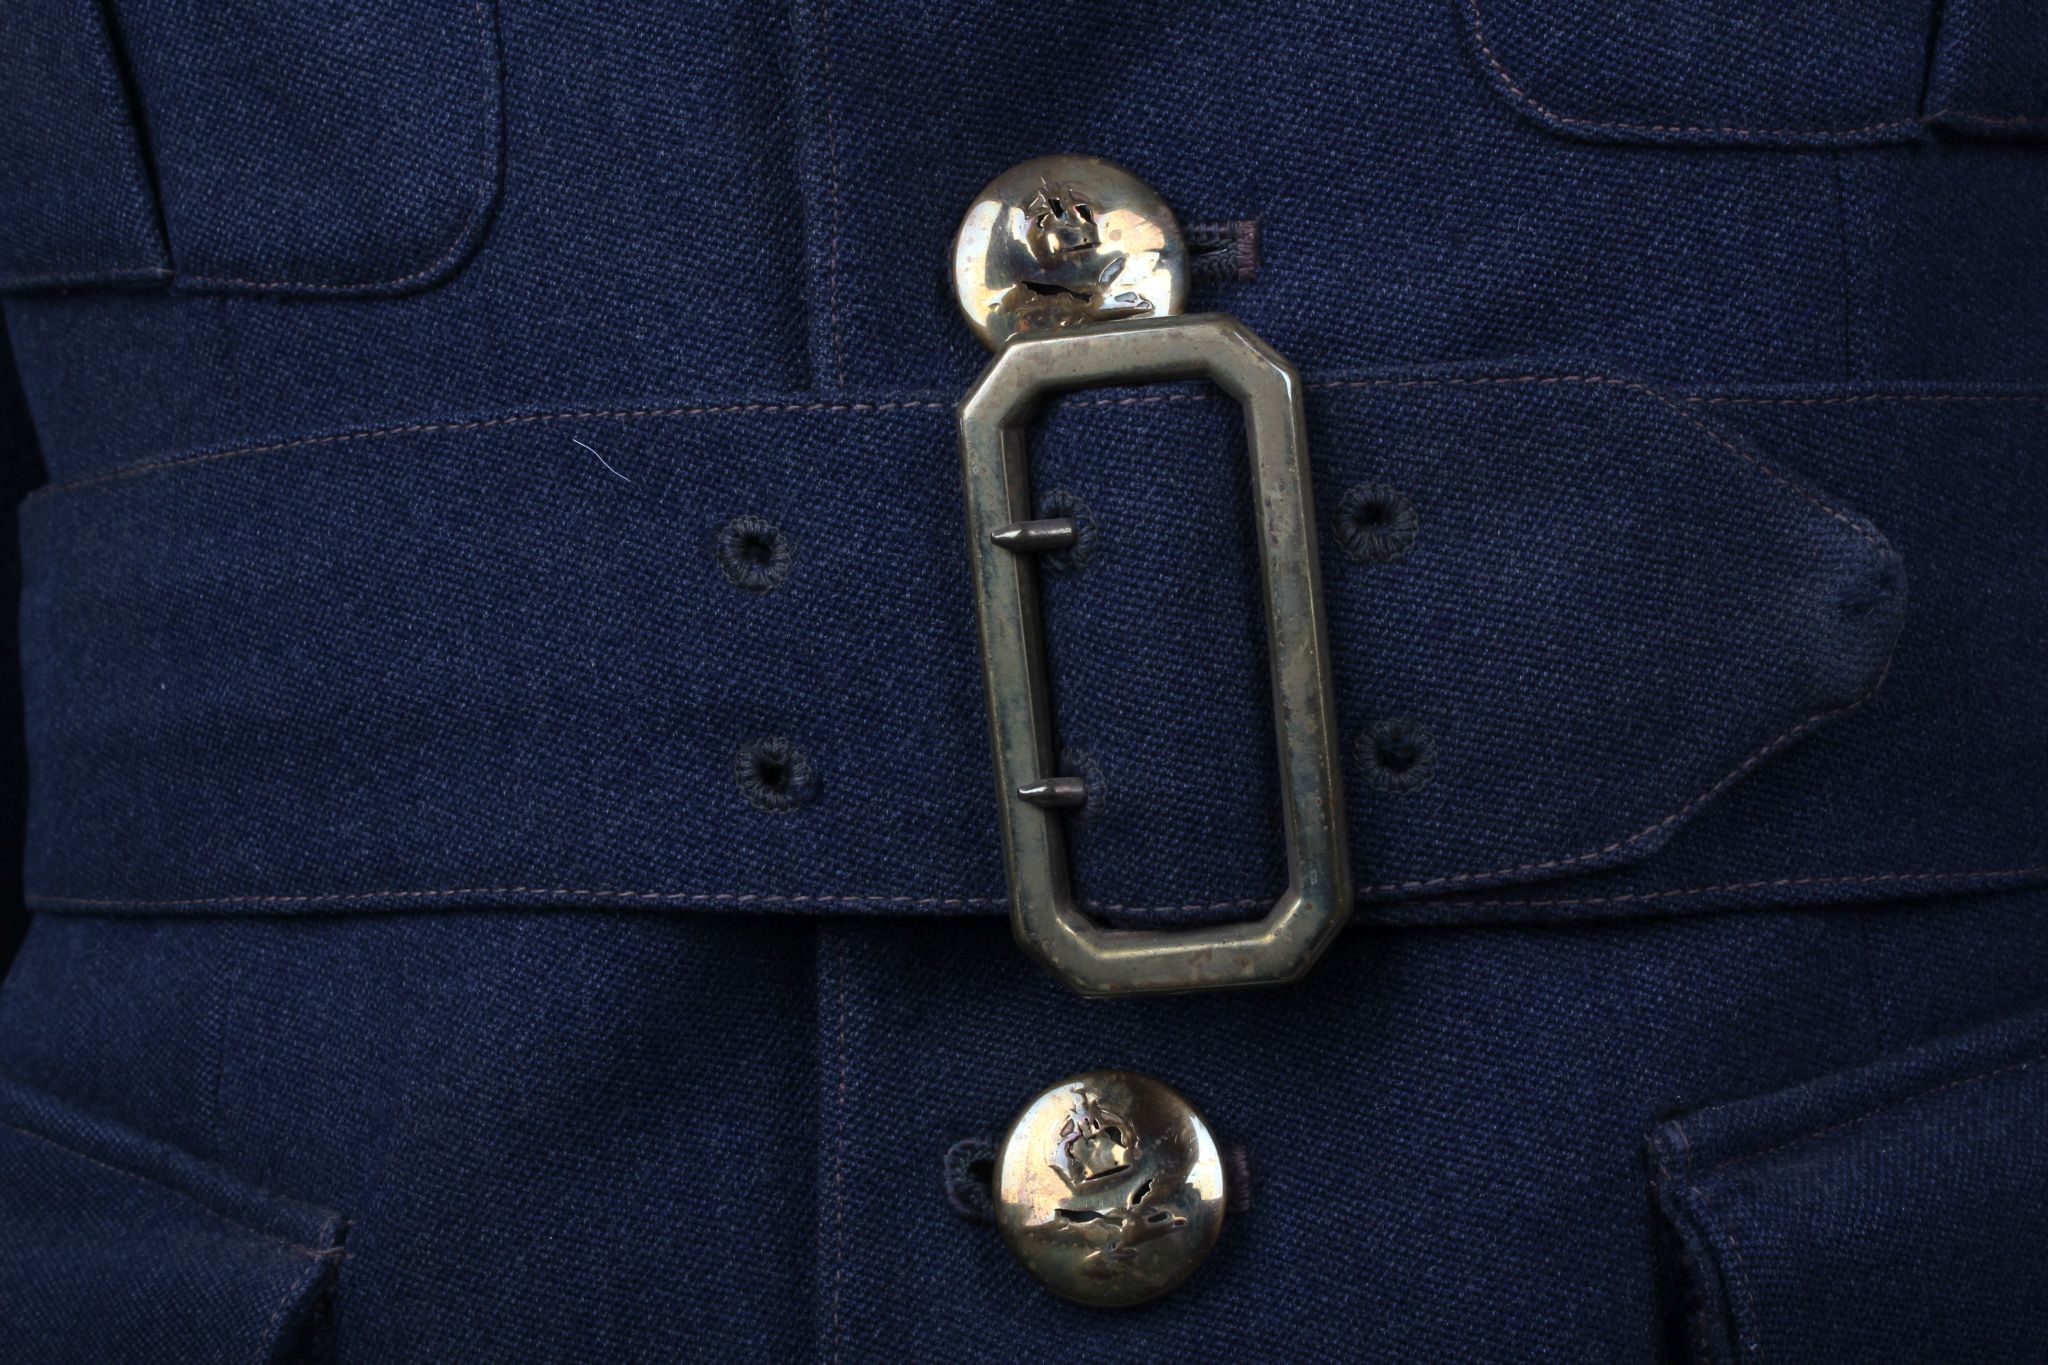 WW2 RAF uniform, former property of P.O. Keys, blue jacket and tropical (Africa) jacket, and a - Image 4 of 10